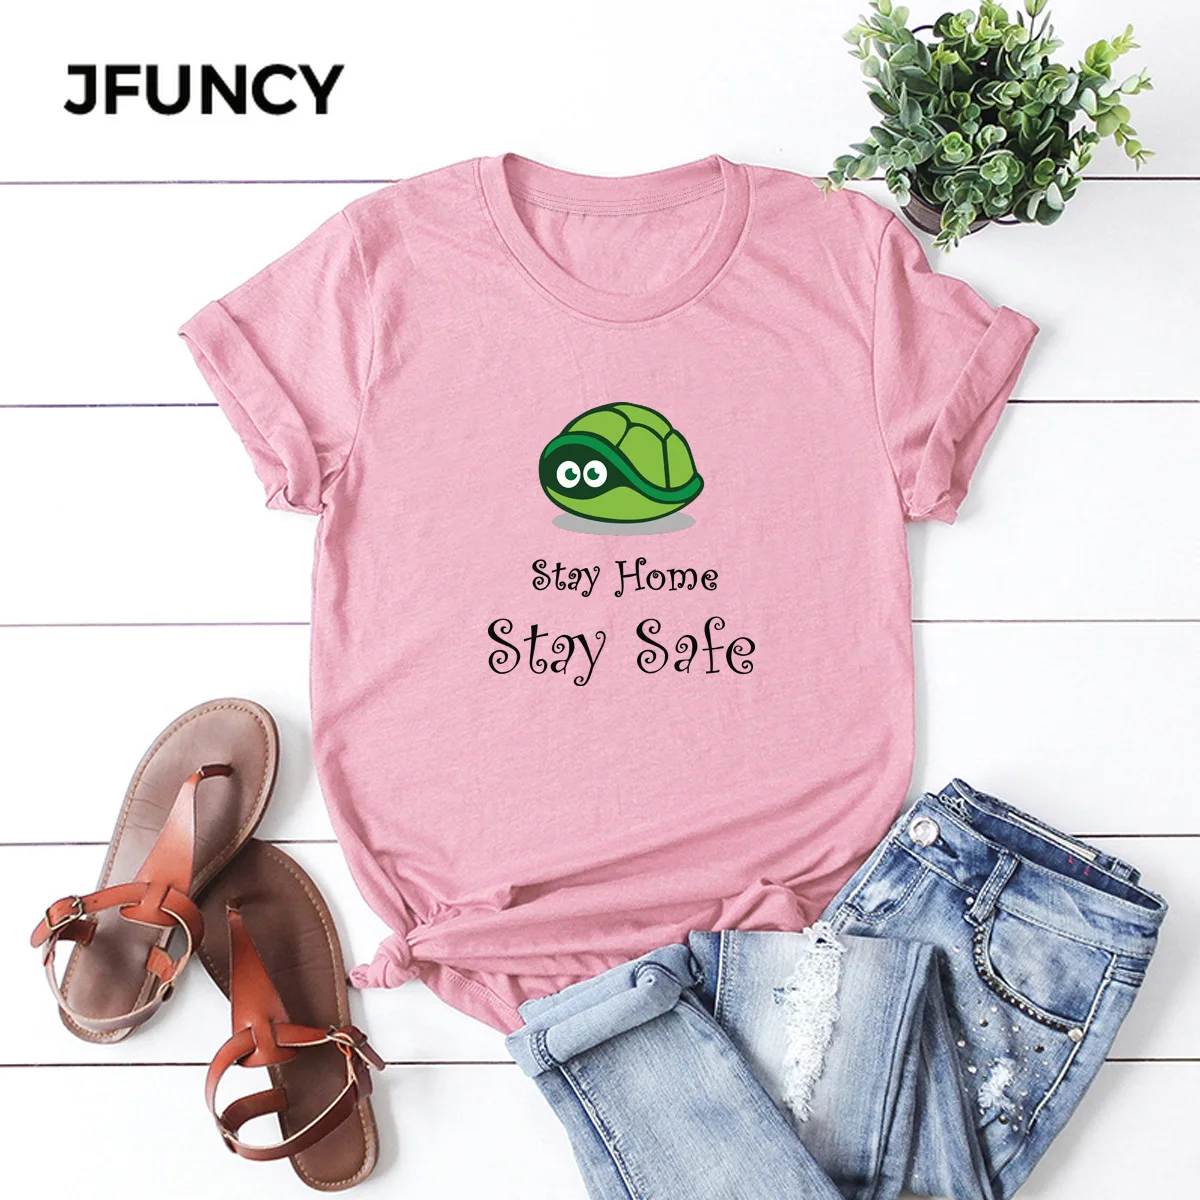 JFUNCY Funny Stay Home Stay Safe Cotton Summer T Shirt Women Short Sleeve T-shirt Female Tees  Casual Lady Basic Tops